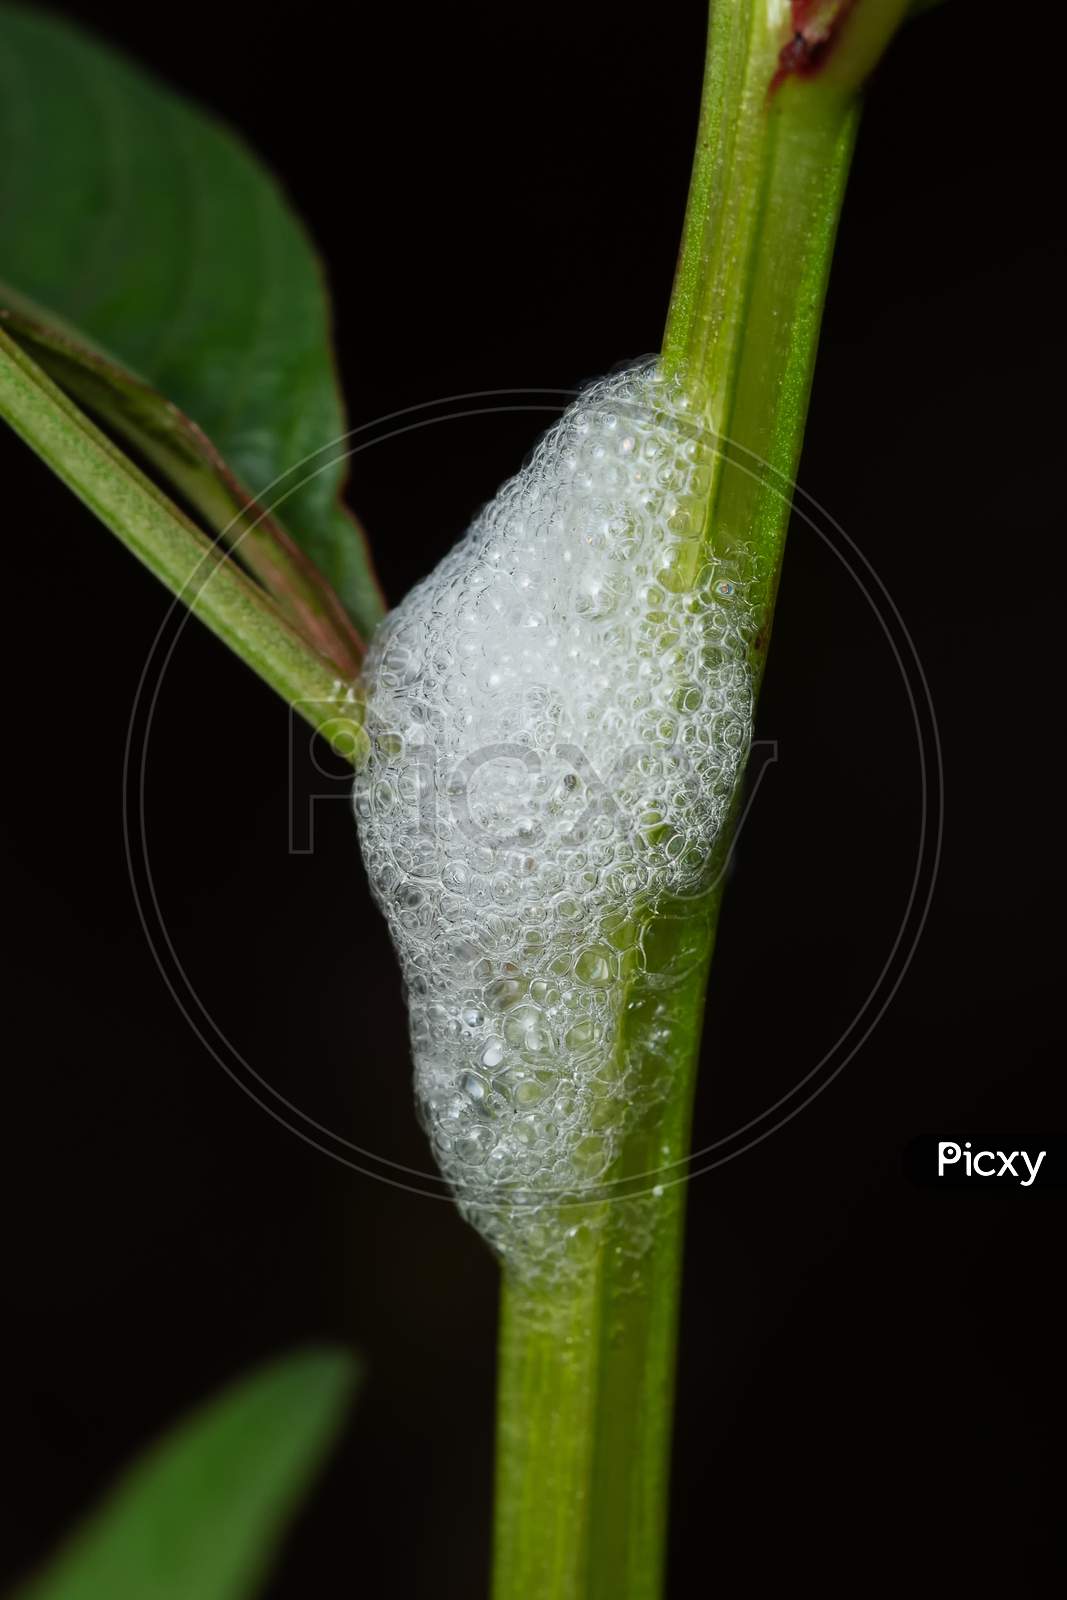 Larvae Of Spittle Bug In Its Home Made Of Foam (Clovia Punctata)